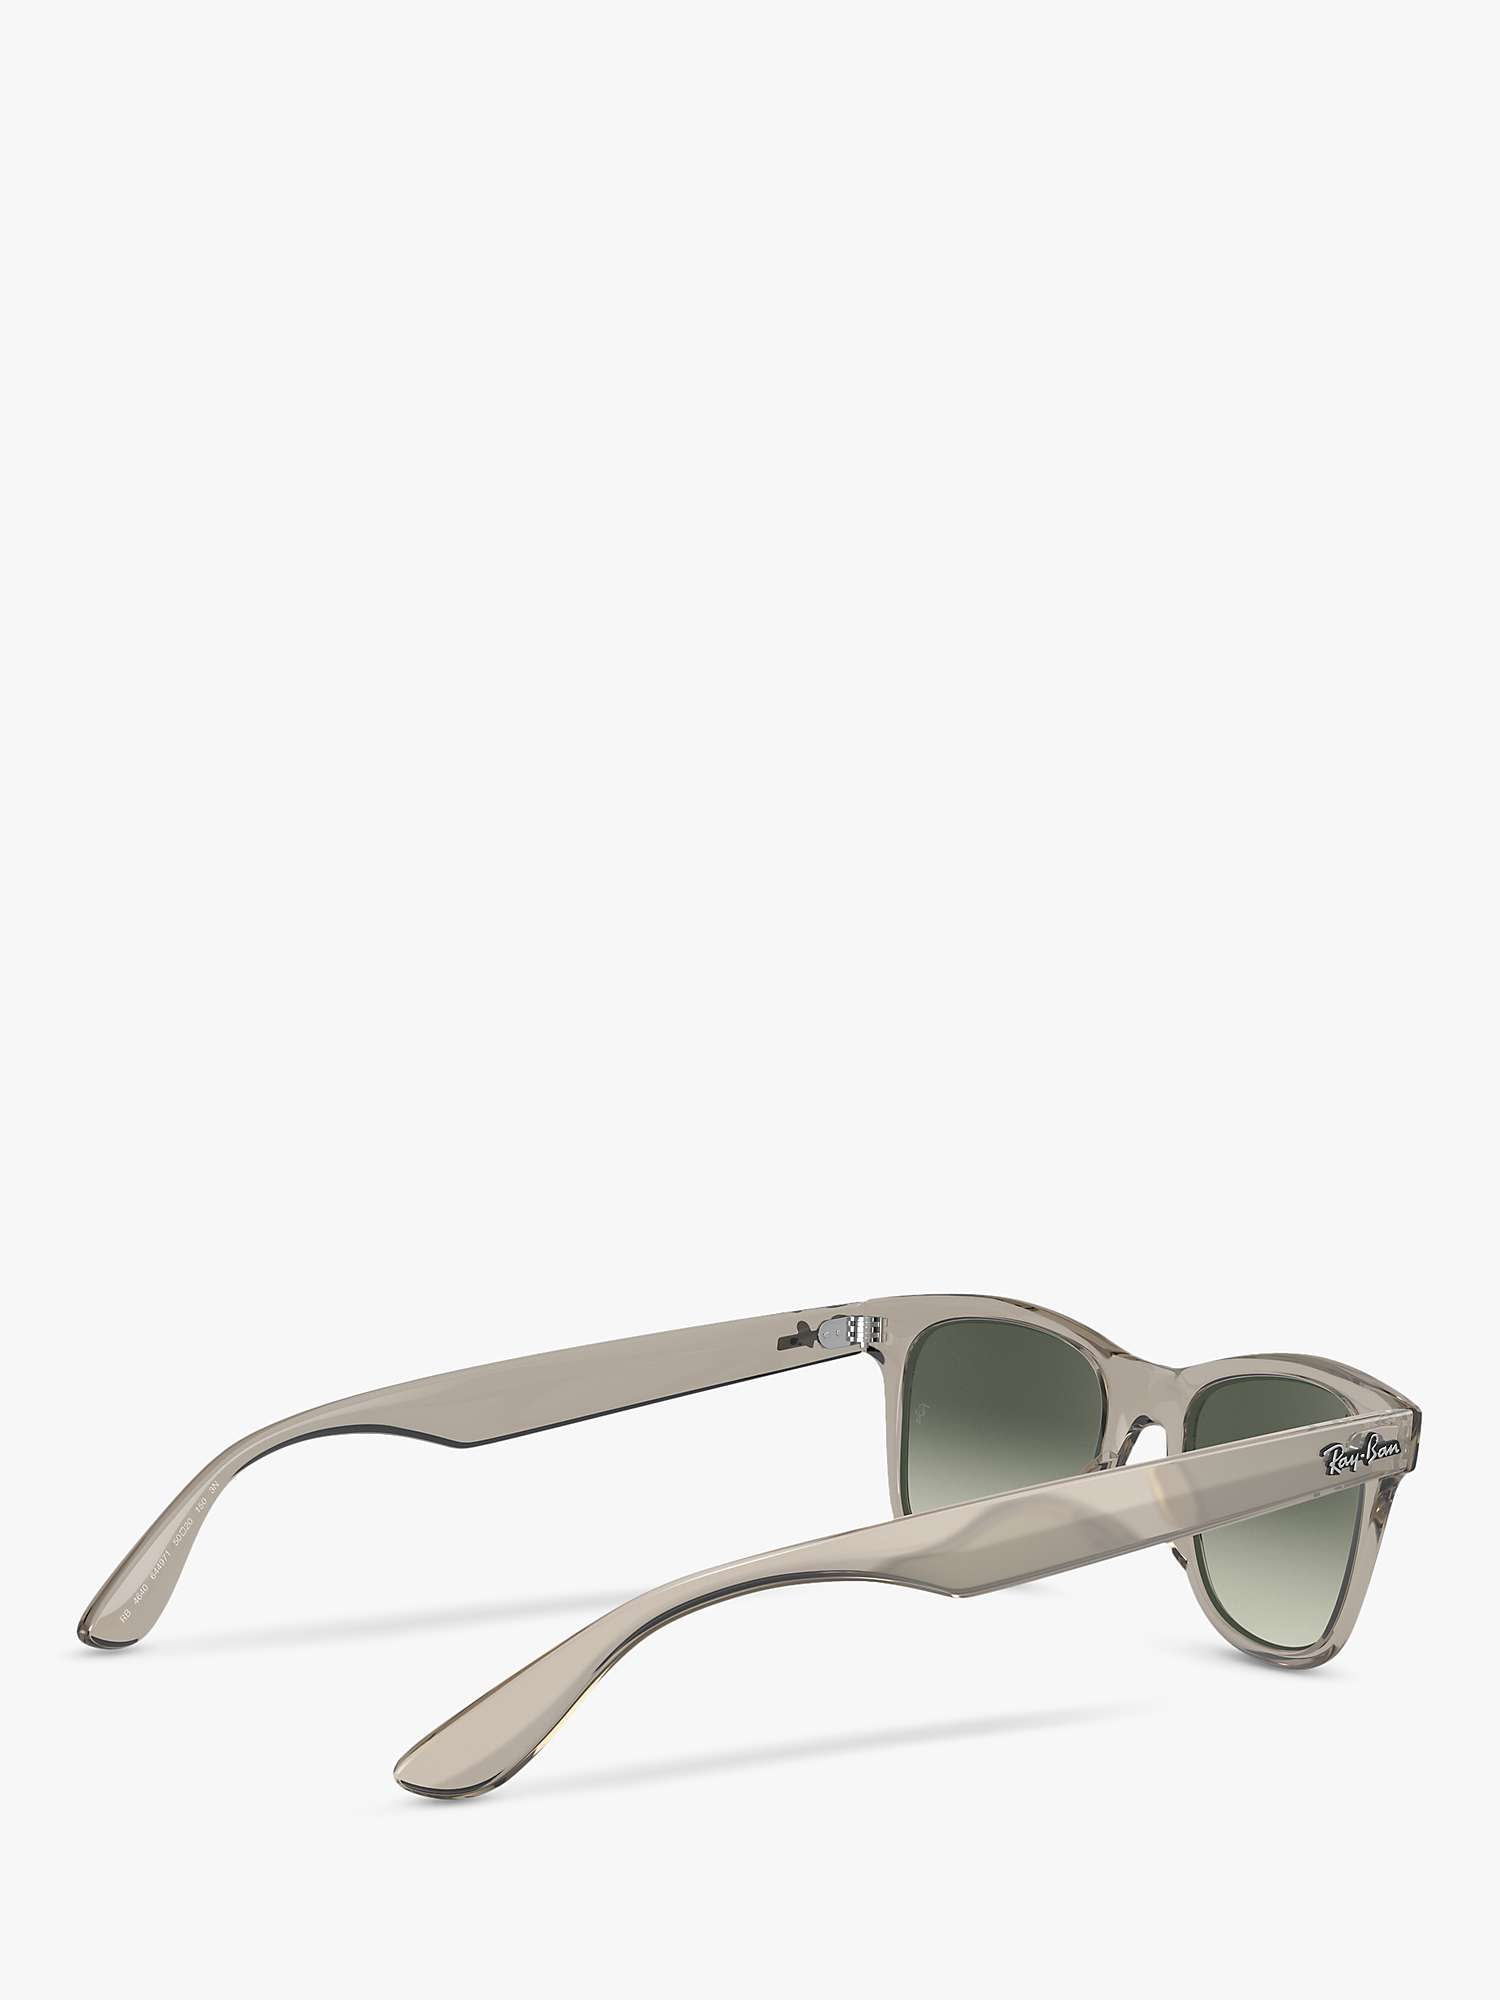 Buy Ray-Ban RB4640 Unisex Square Sunglasses, Transparent Grey/Green Gradient Online at johnlewis.com